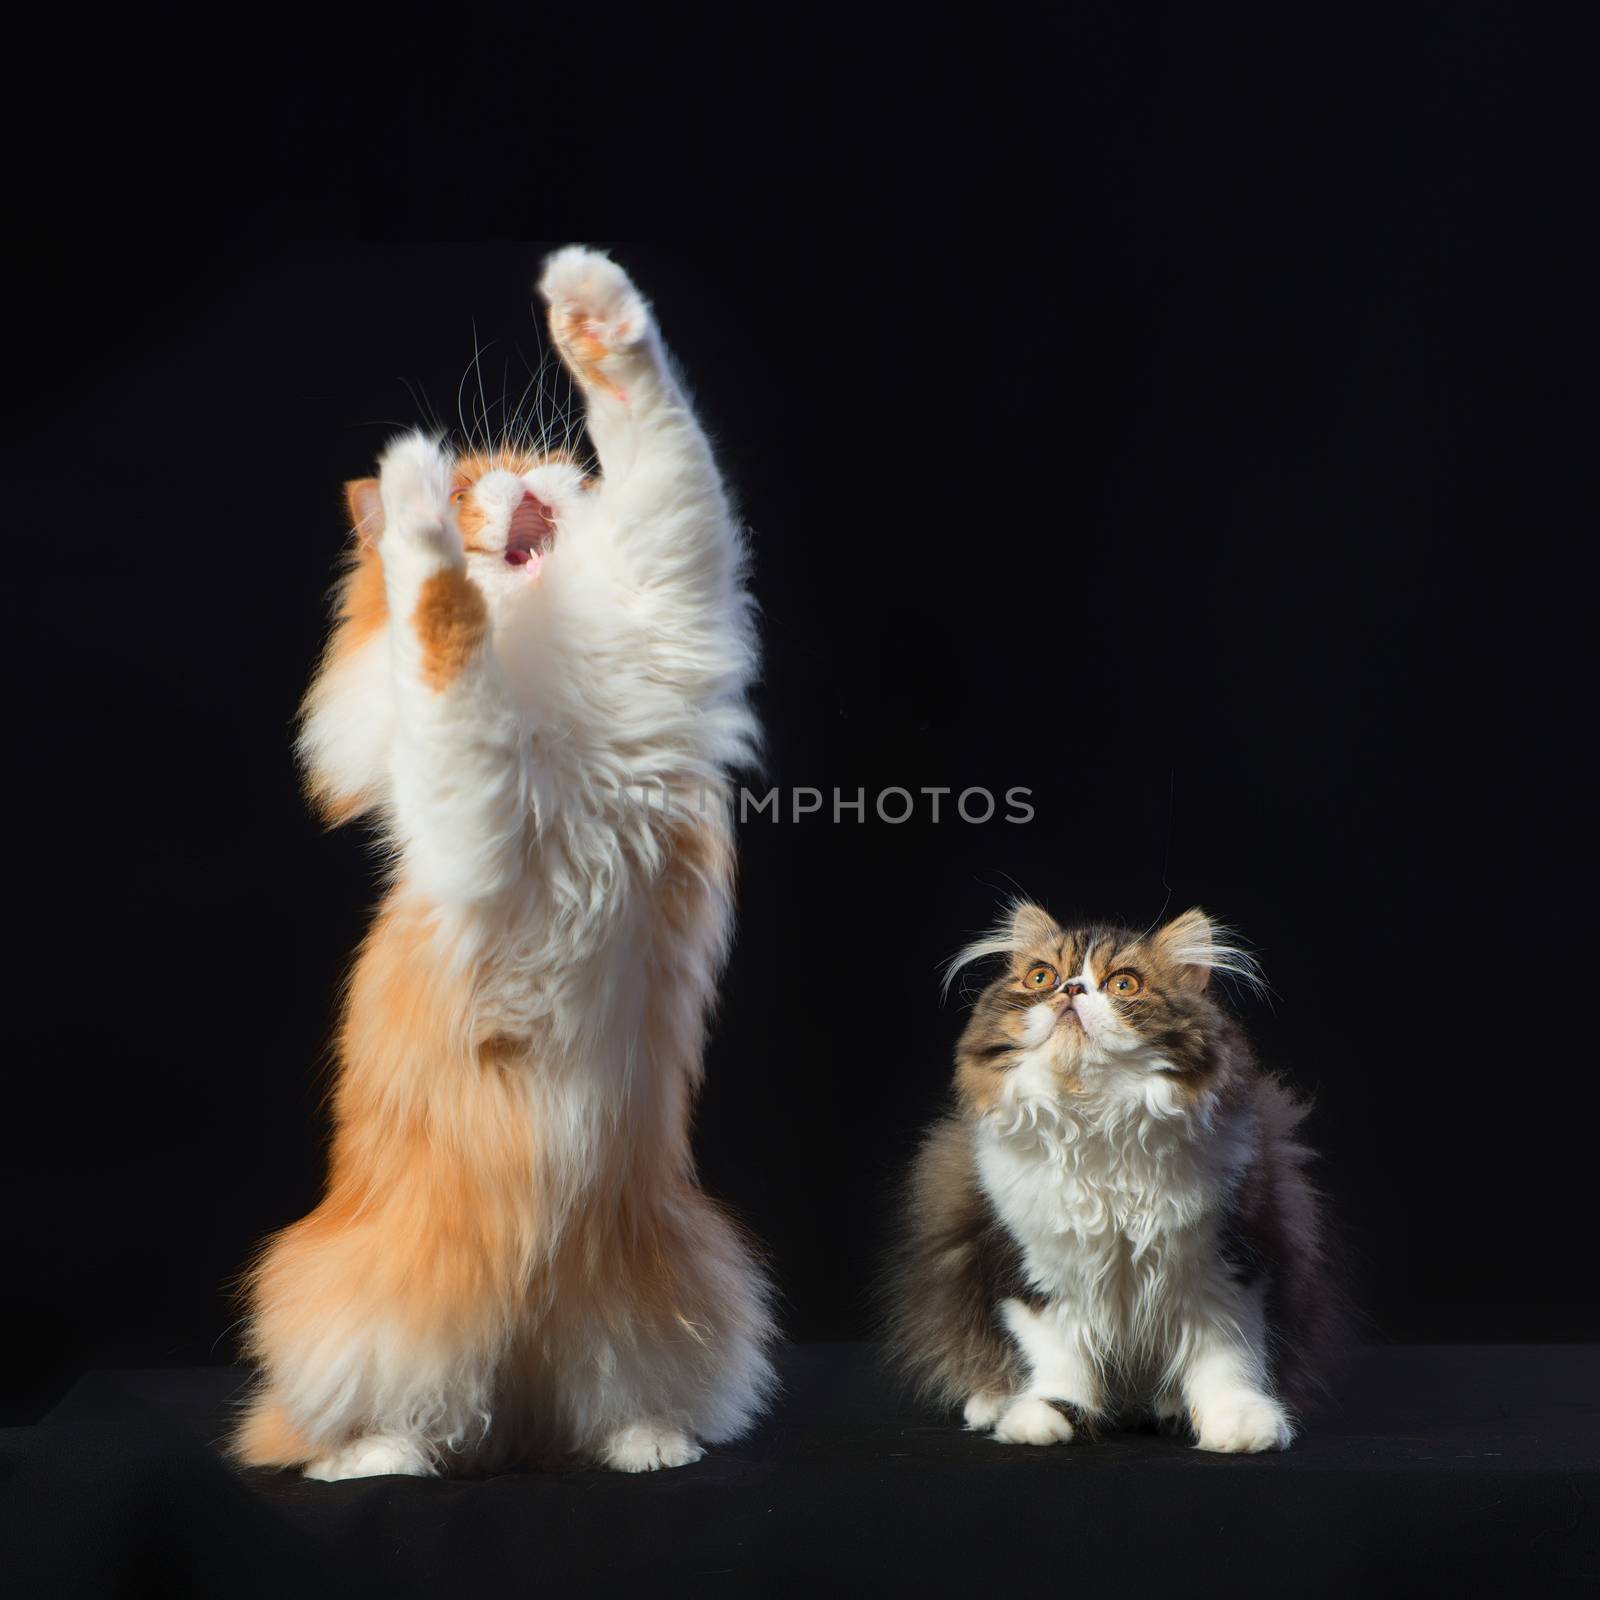 Two persian cats of different coloring by fotooxotnik